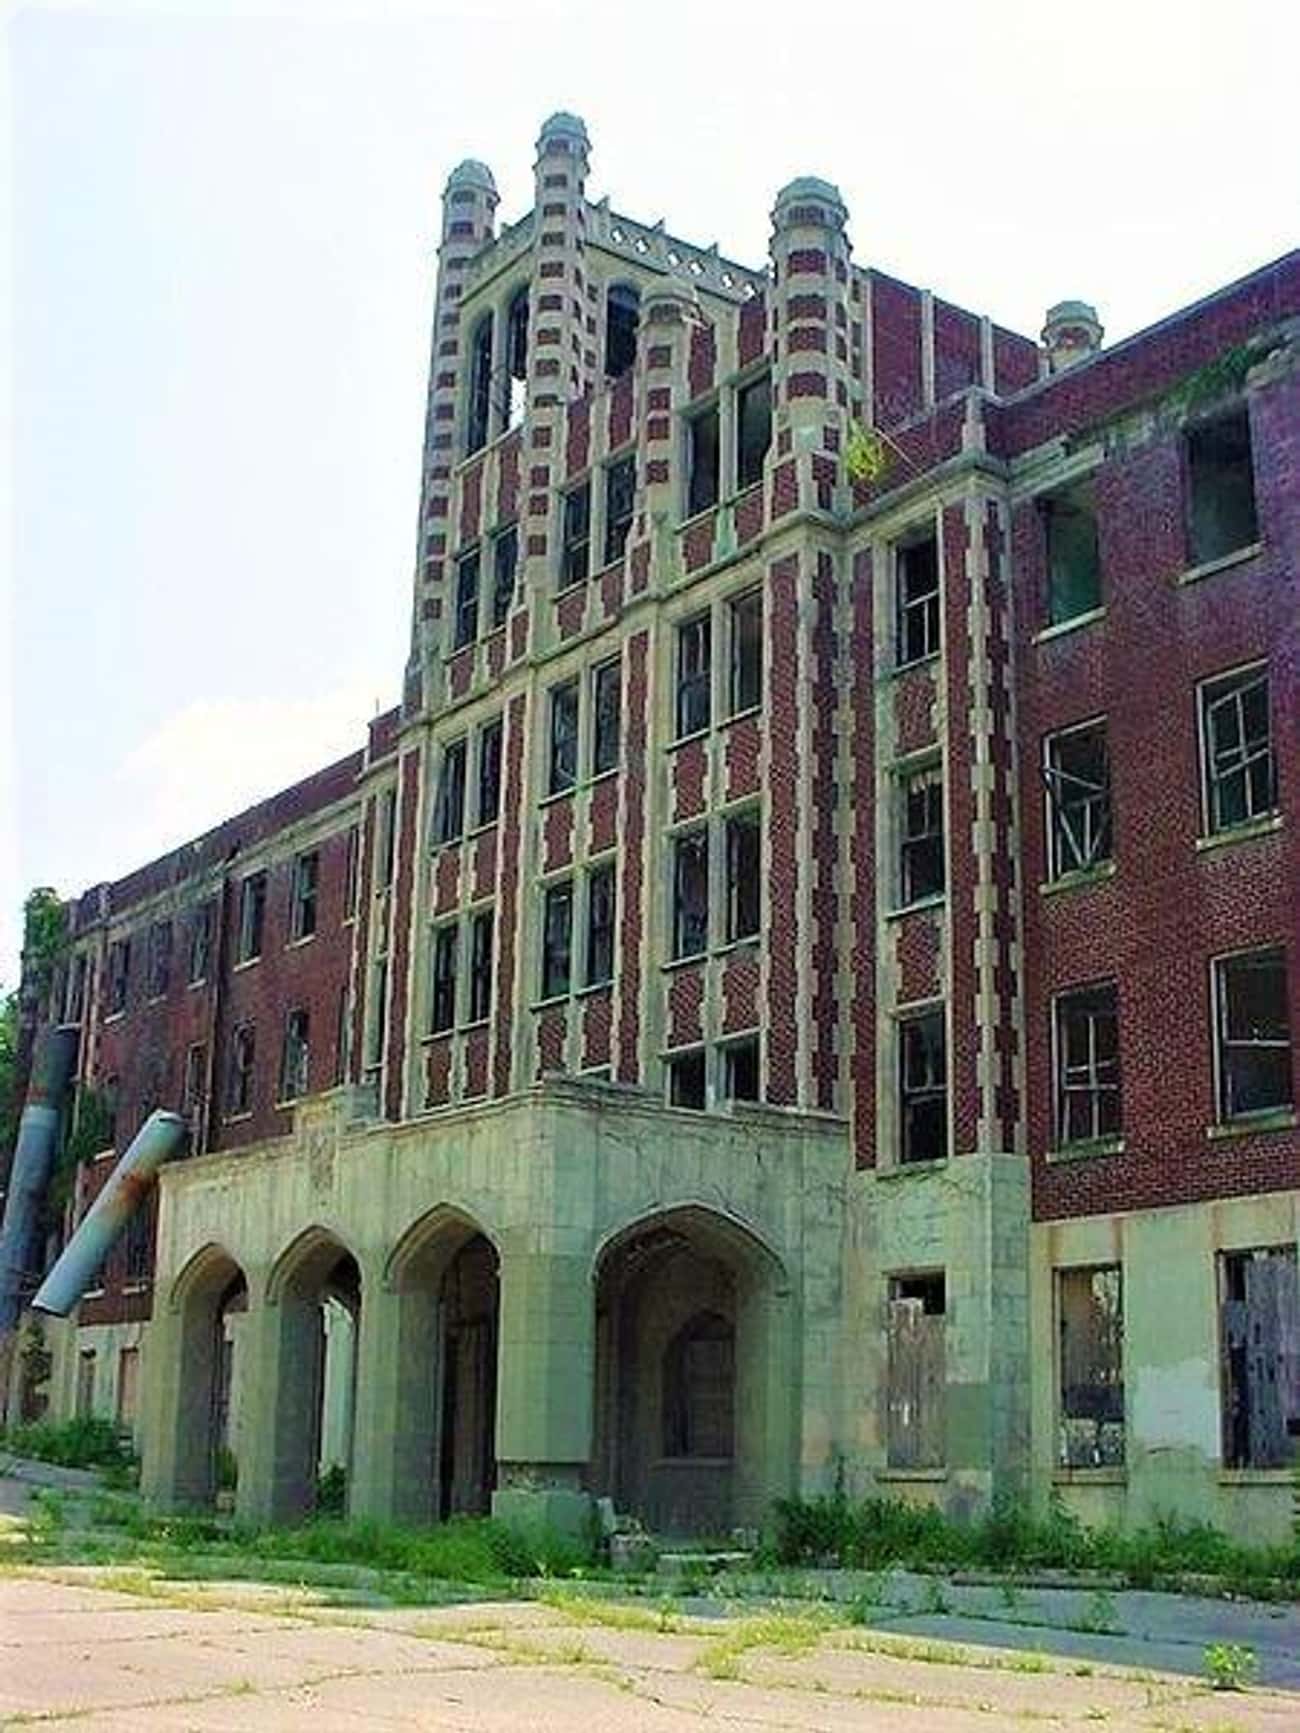 The Moans Of The Infirm Can Still Be Heard In The Waverly Hills Sanatorium